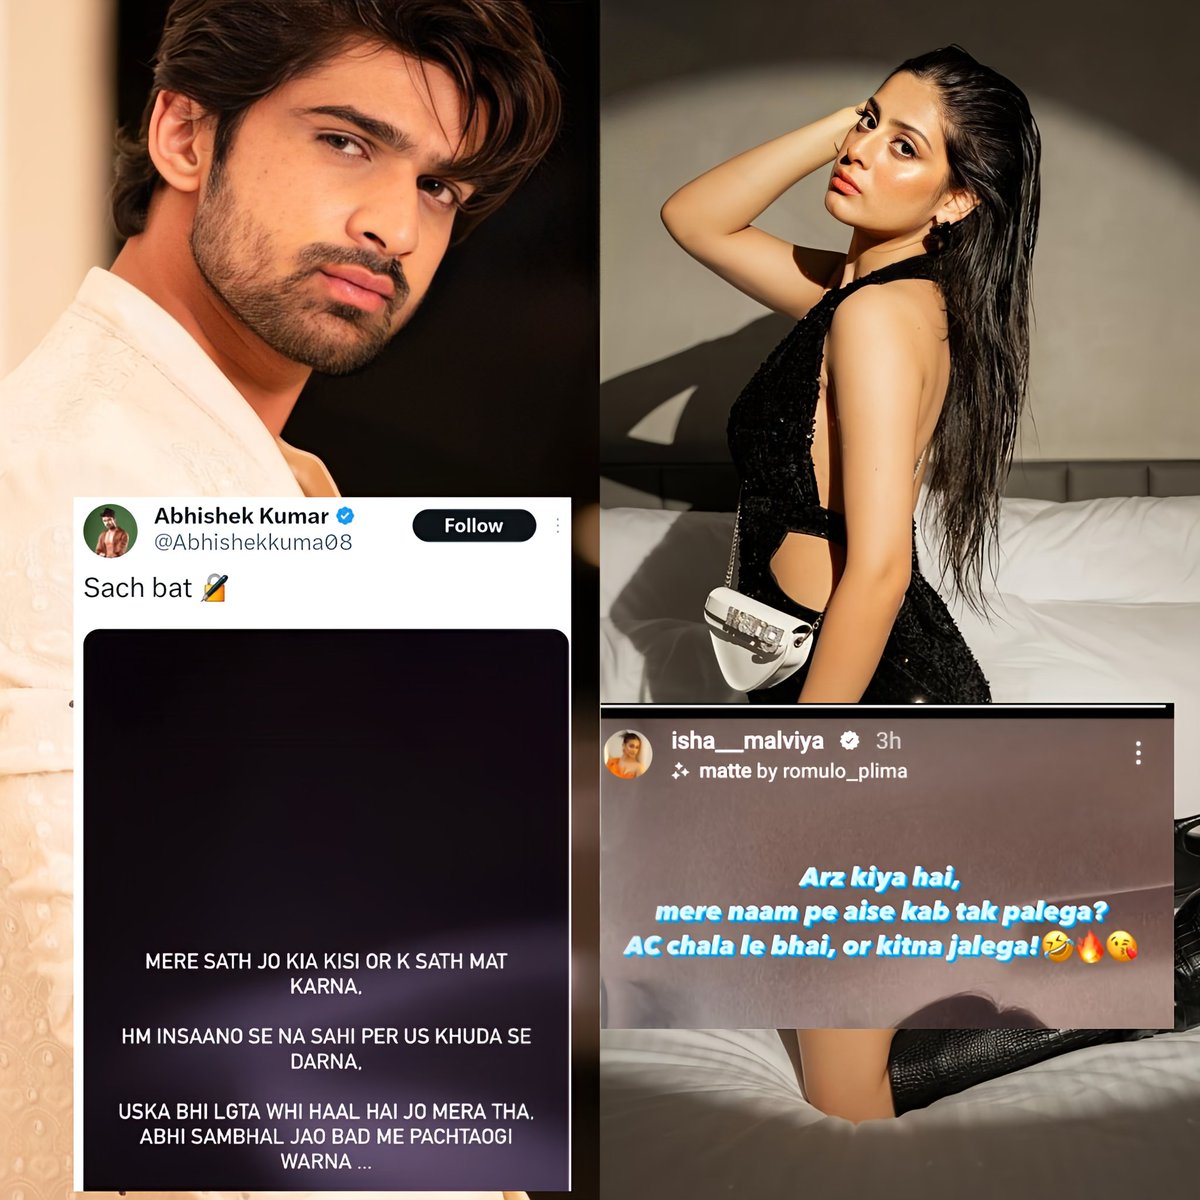 #IshaMalviya gives it back to #AbhishekKumar for his constant shayri's on her. Latest Taunting Isha on Breakup with #SamarthJurel 

Seriously @Abhishekkuma08 needs to move on from this obsession with @TheIshaMalviya  it doesn't look normal at all 🤦‍♂️